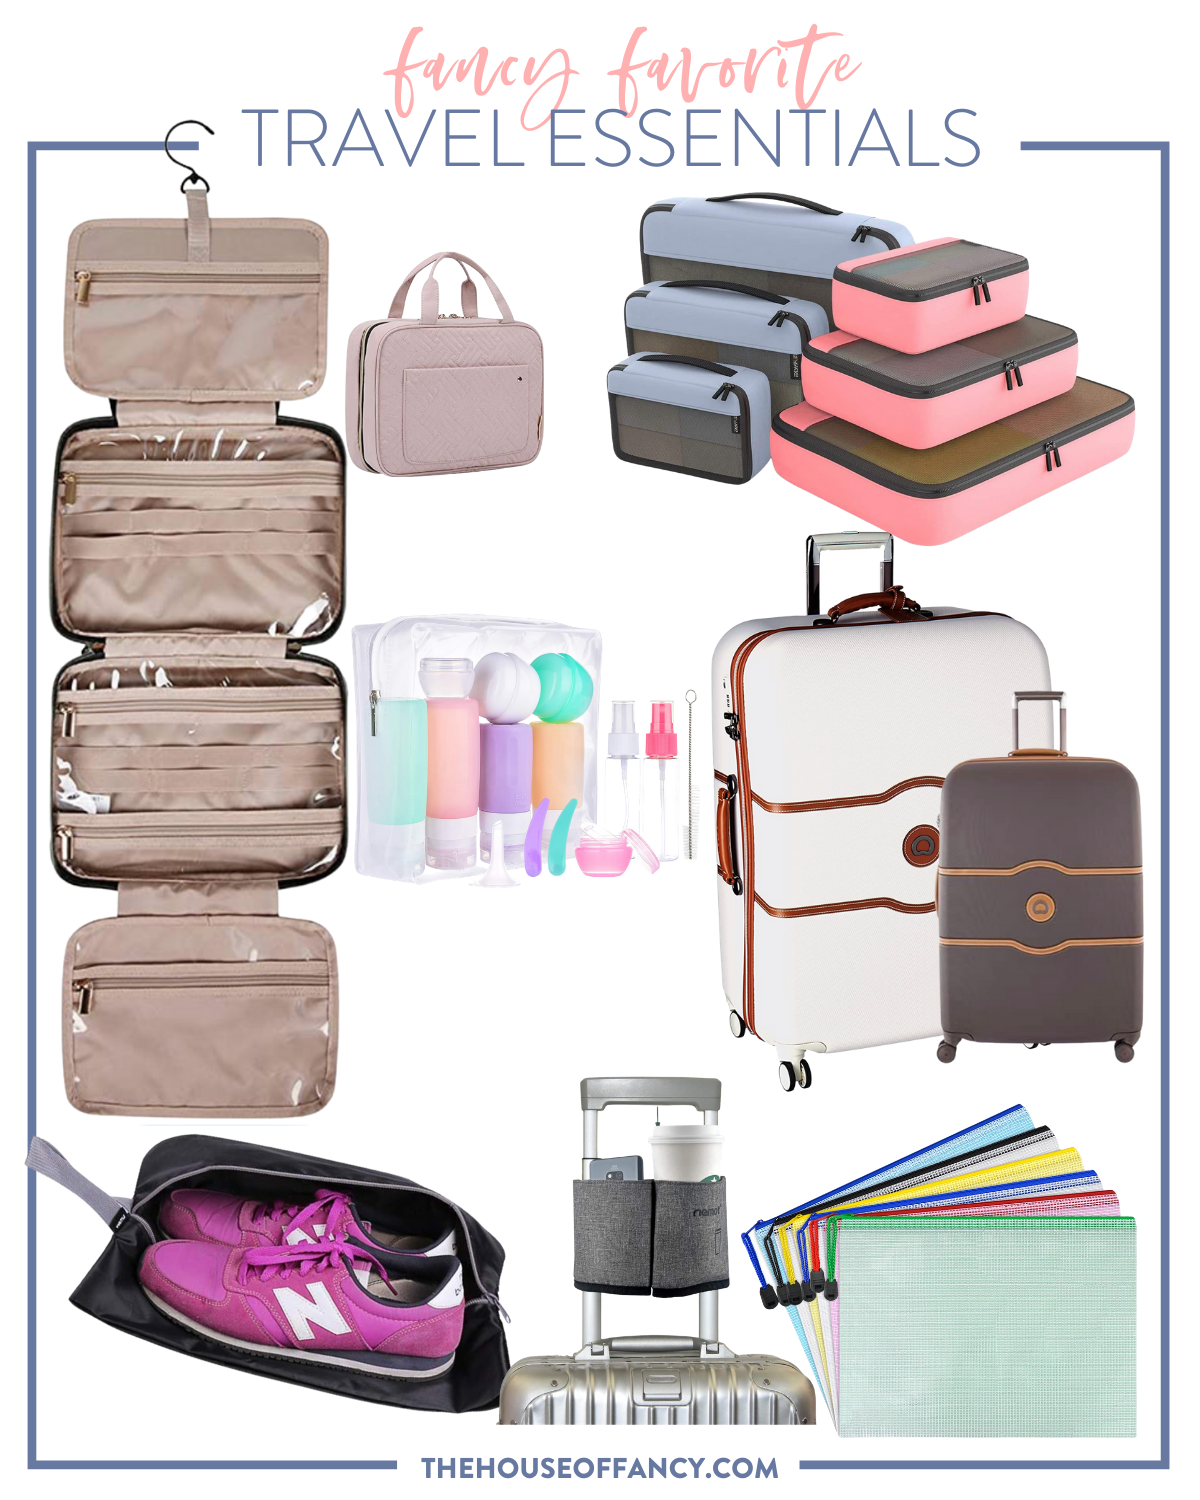 Seaside Florida by popular Houston travel blog, The House of Fancy: collage image of a cosmetics bag, travel containers, shoe bag, cosmetics bags, packing cubes, luggage strap, and rollaway suitcase. 